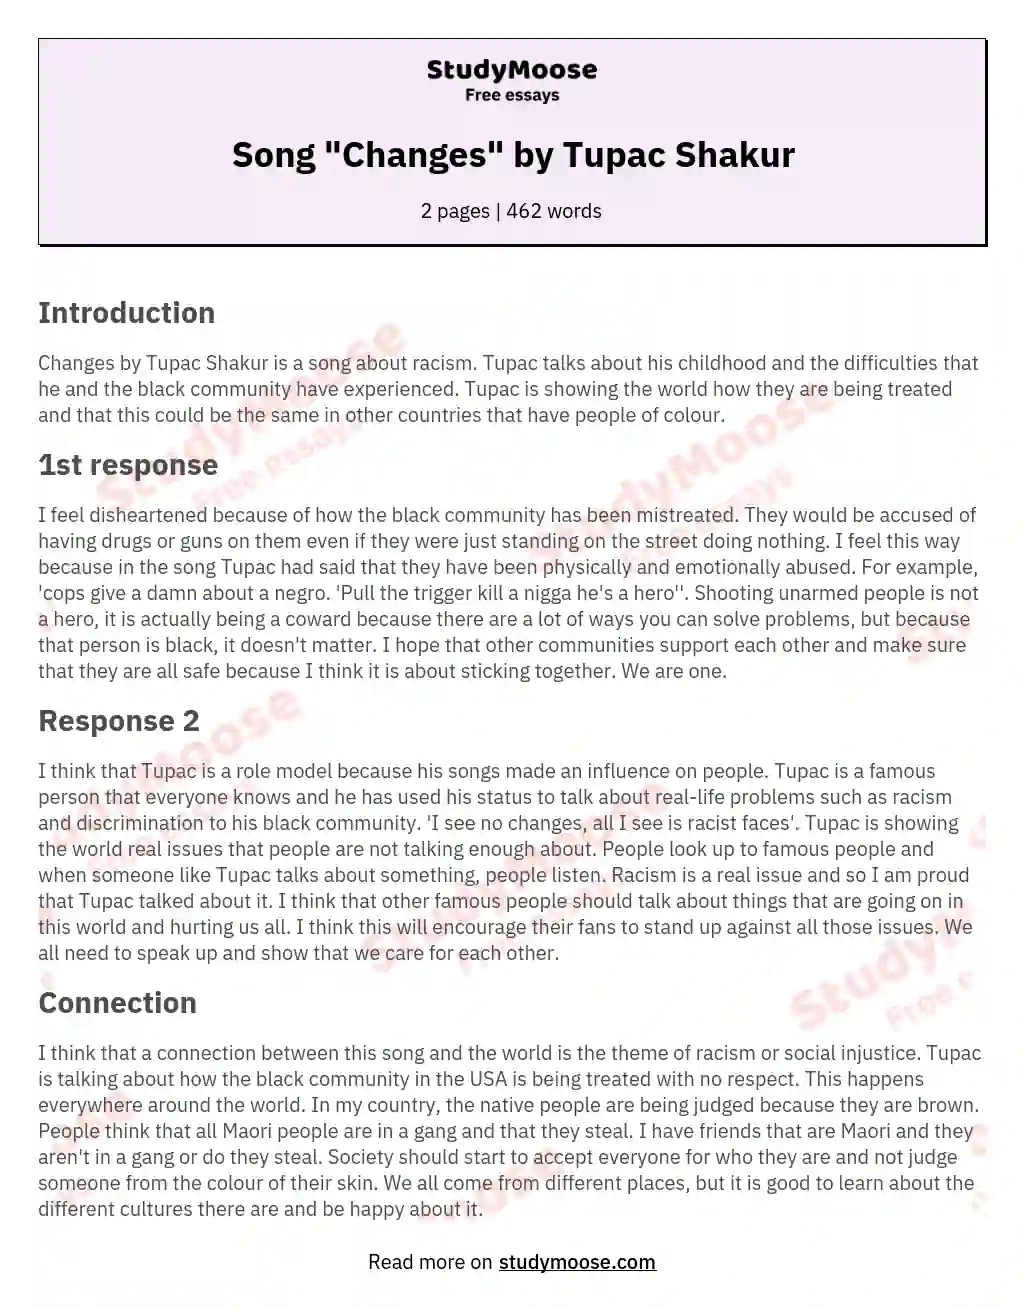 Song "Changes" by Tupac Shakur essay